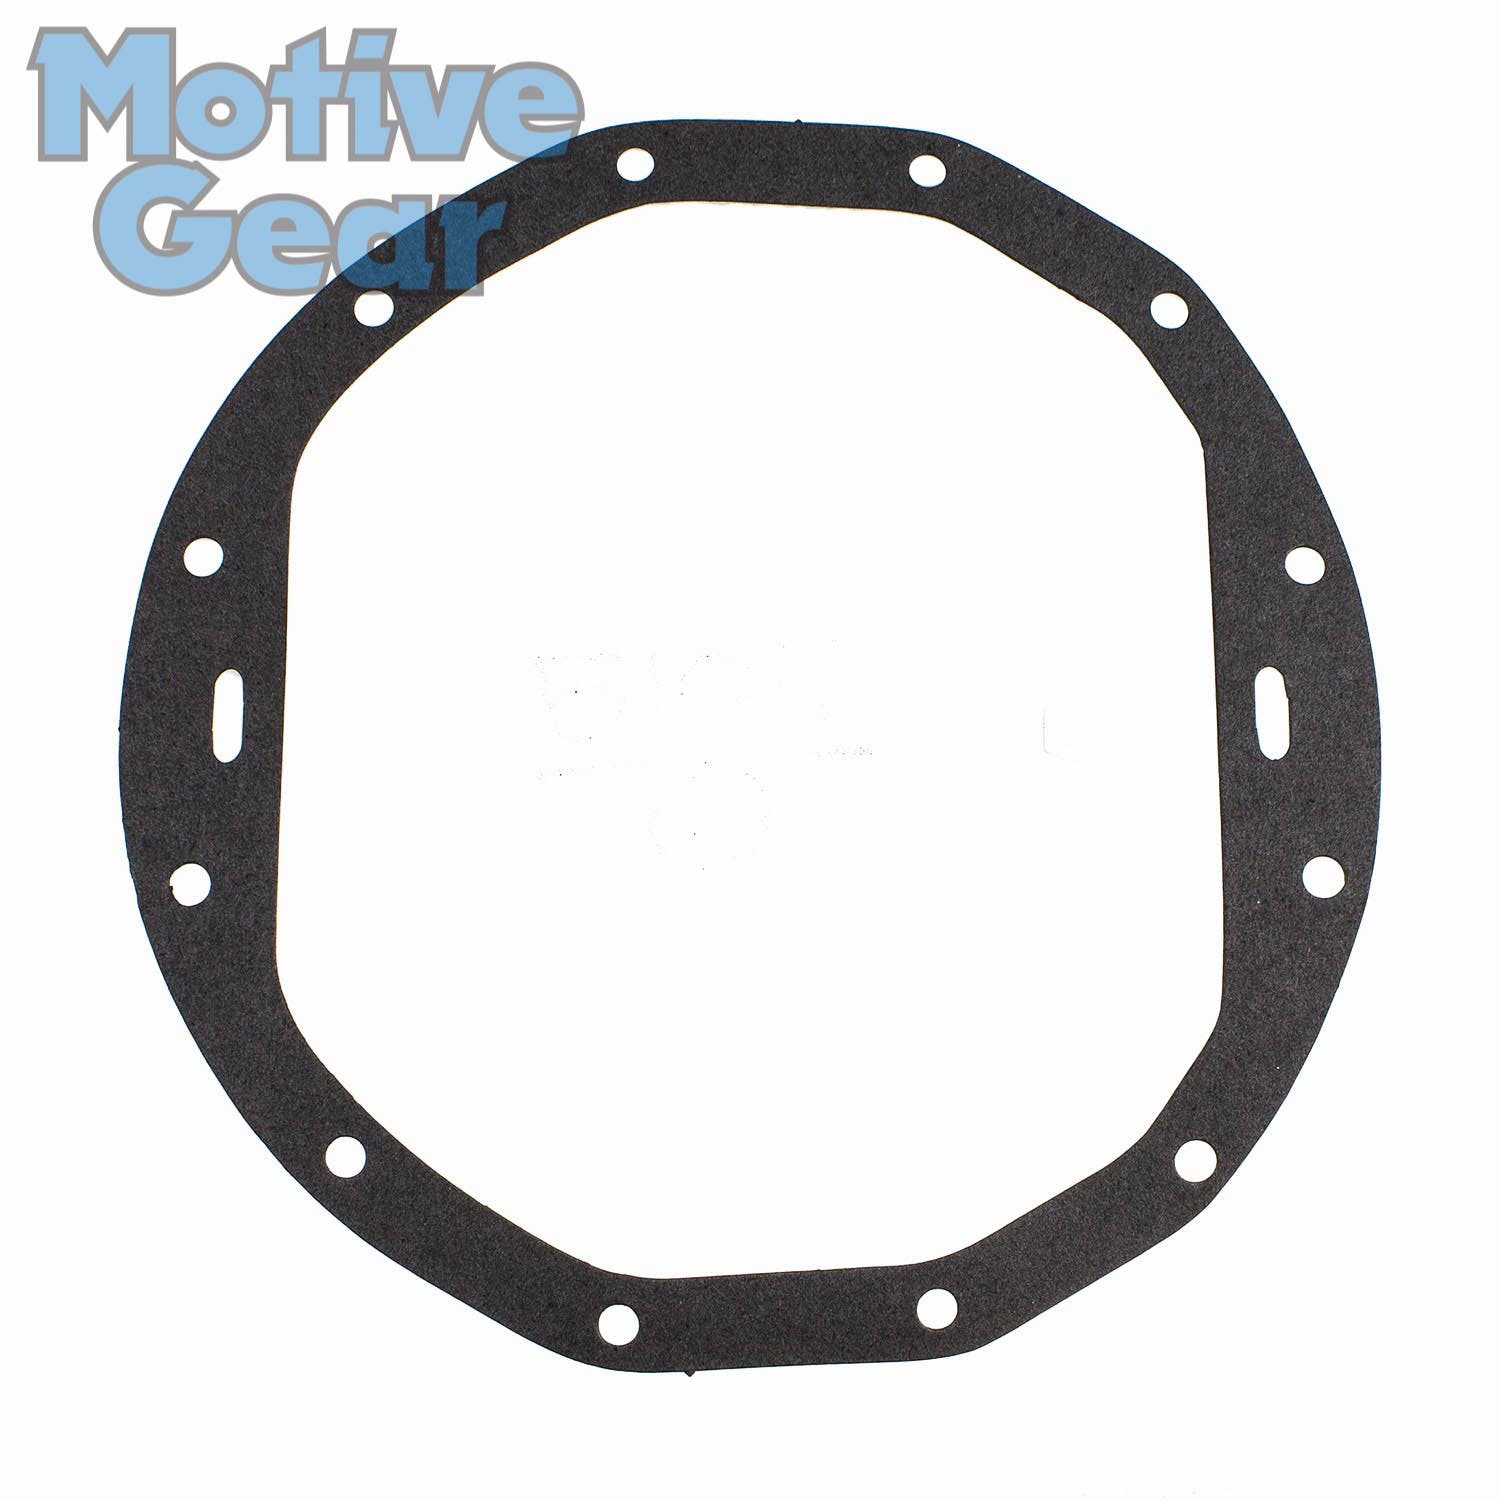 Motive Gear 5104 Differential Cover Gasket